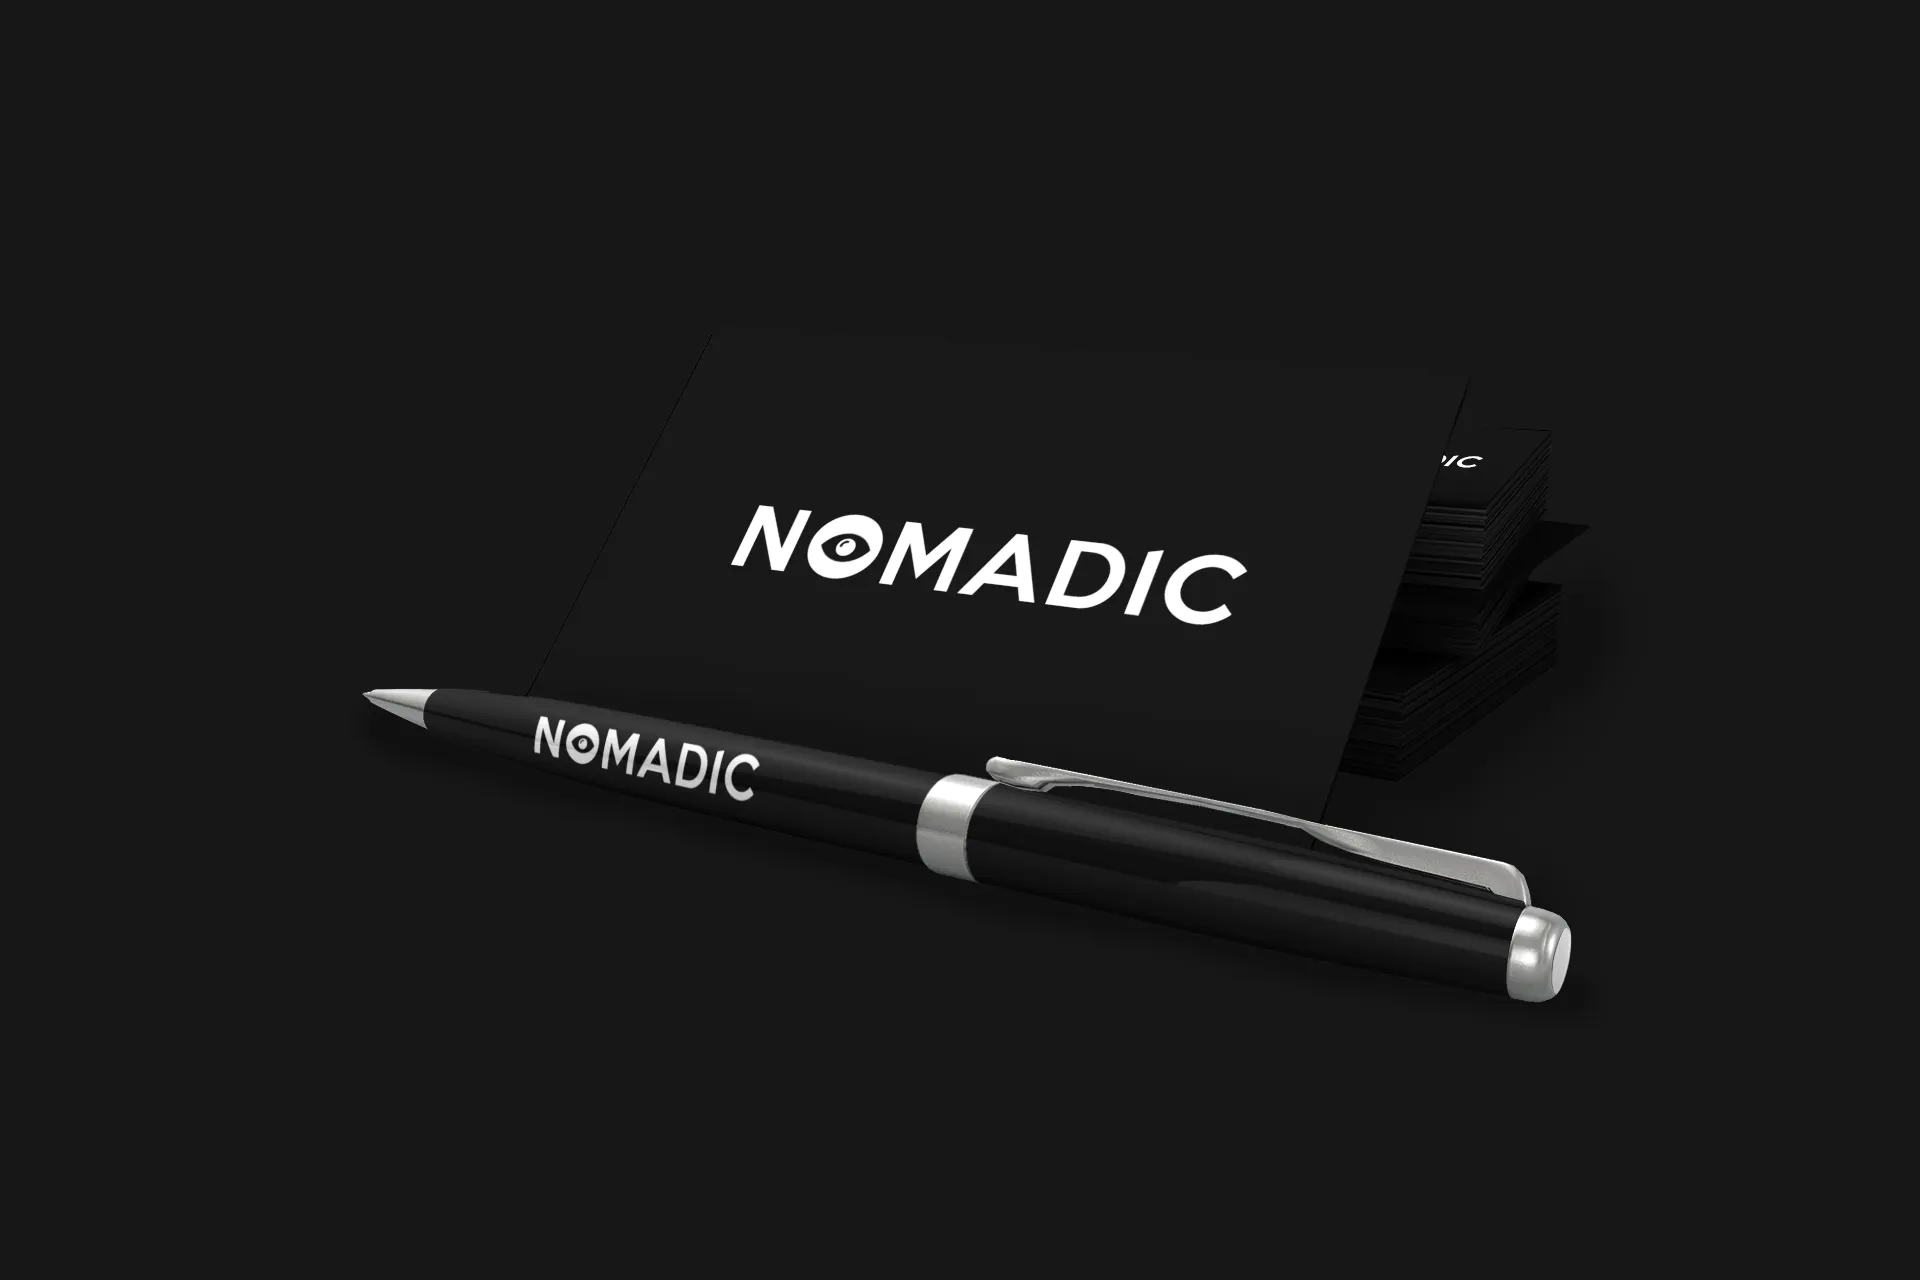 Nomadic Vision business cards and accessories